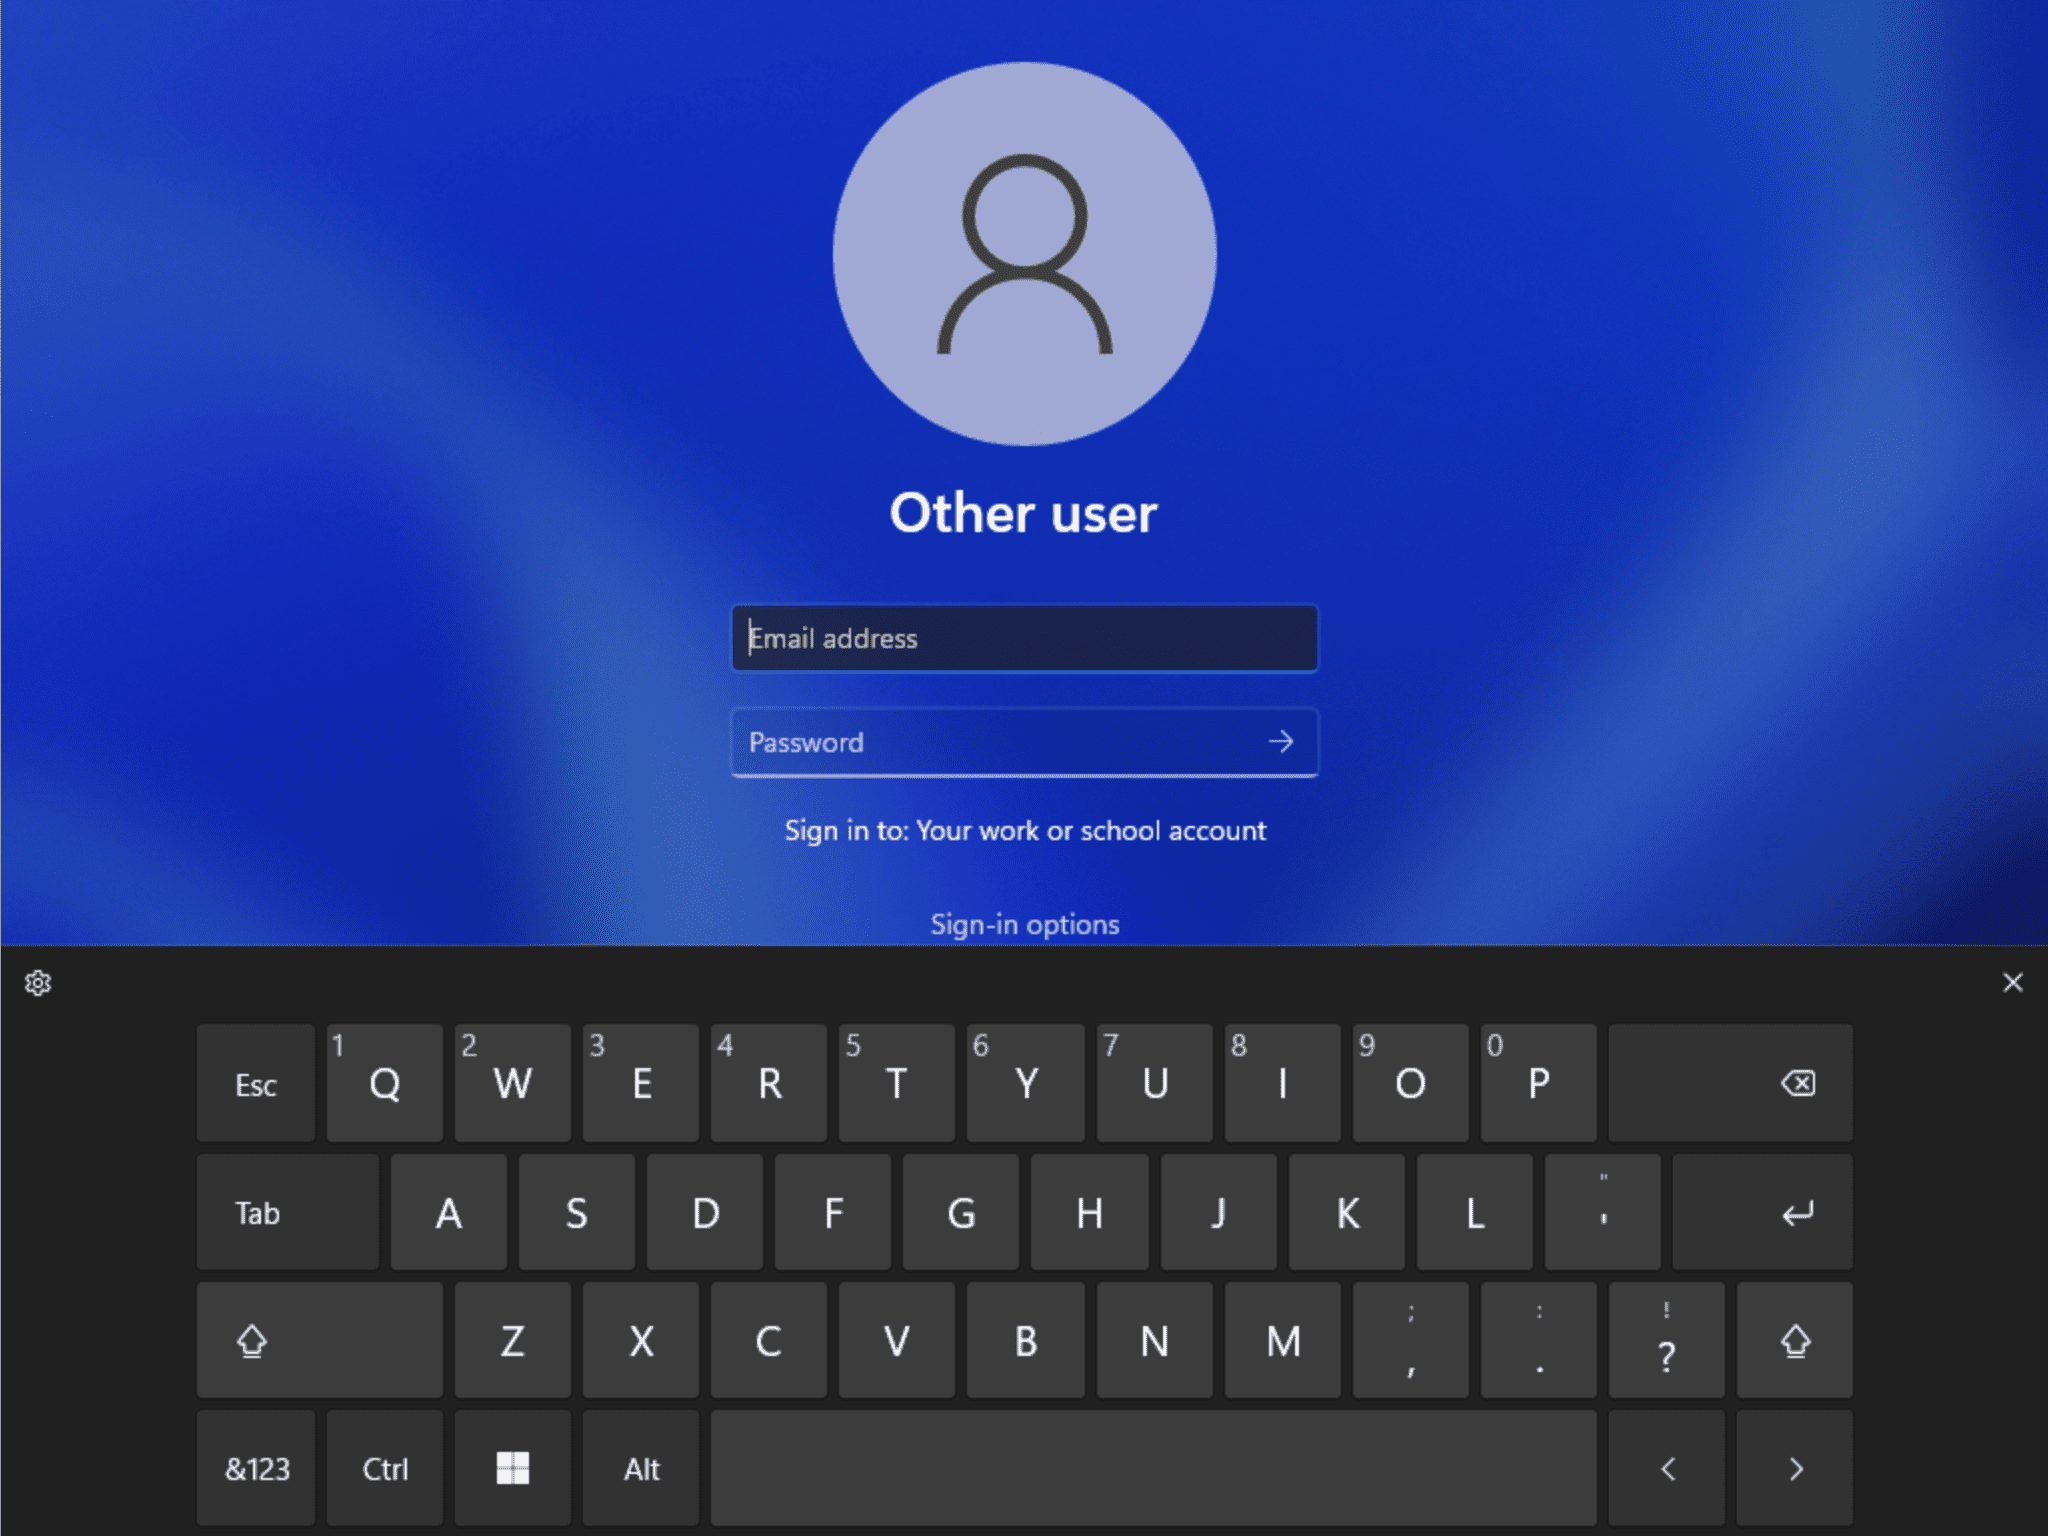 The updated touch keyboard design as seen from the Lock screen.